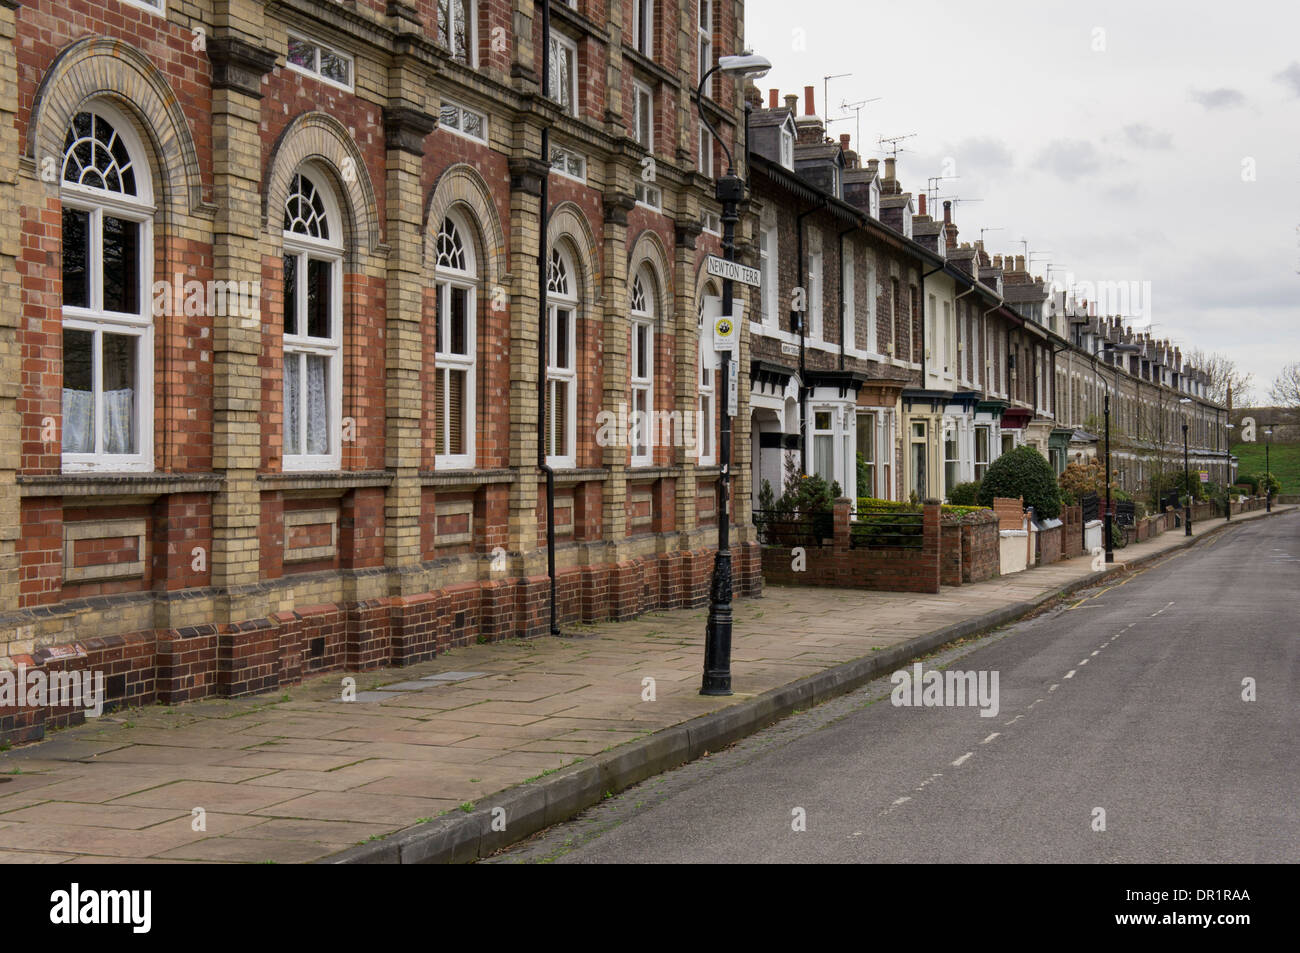 Newton Terrace in residential area of city (uniform row of Victorian terrace houses & historic converted chapel) - York, North Yorkshire, England, UK. Stock Photo